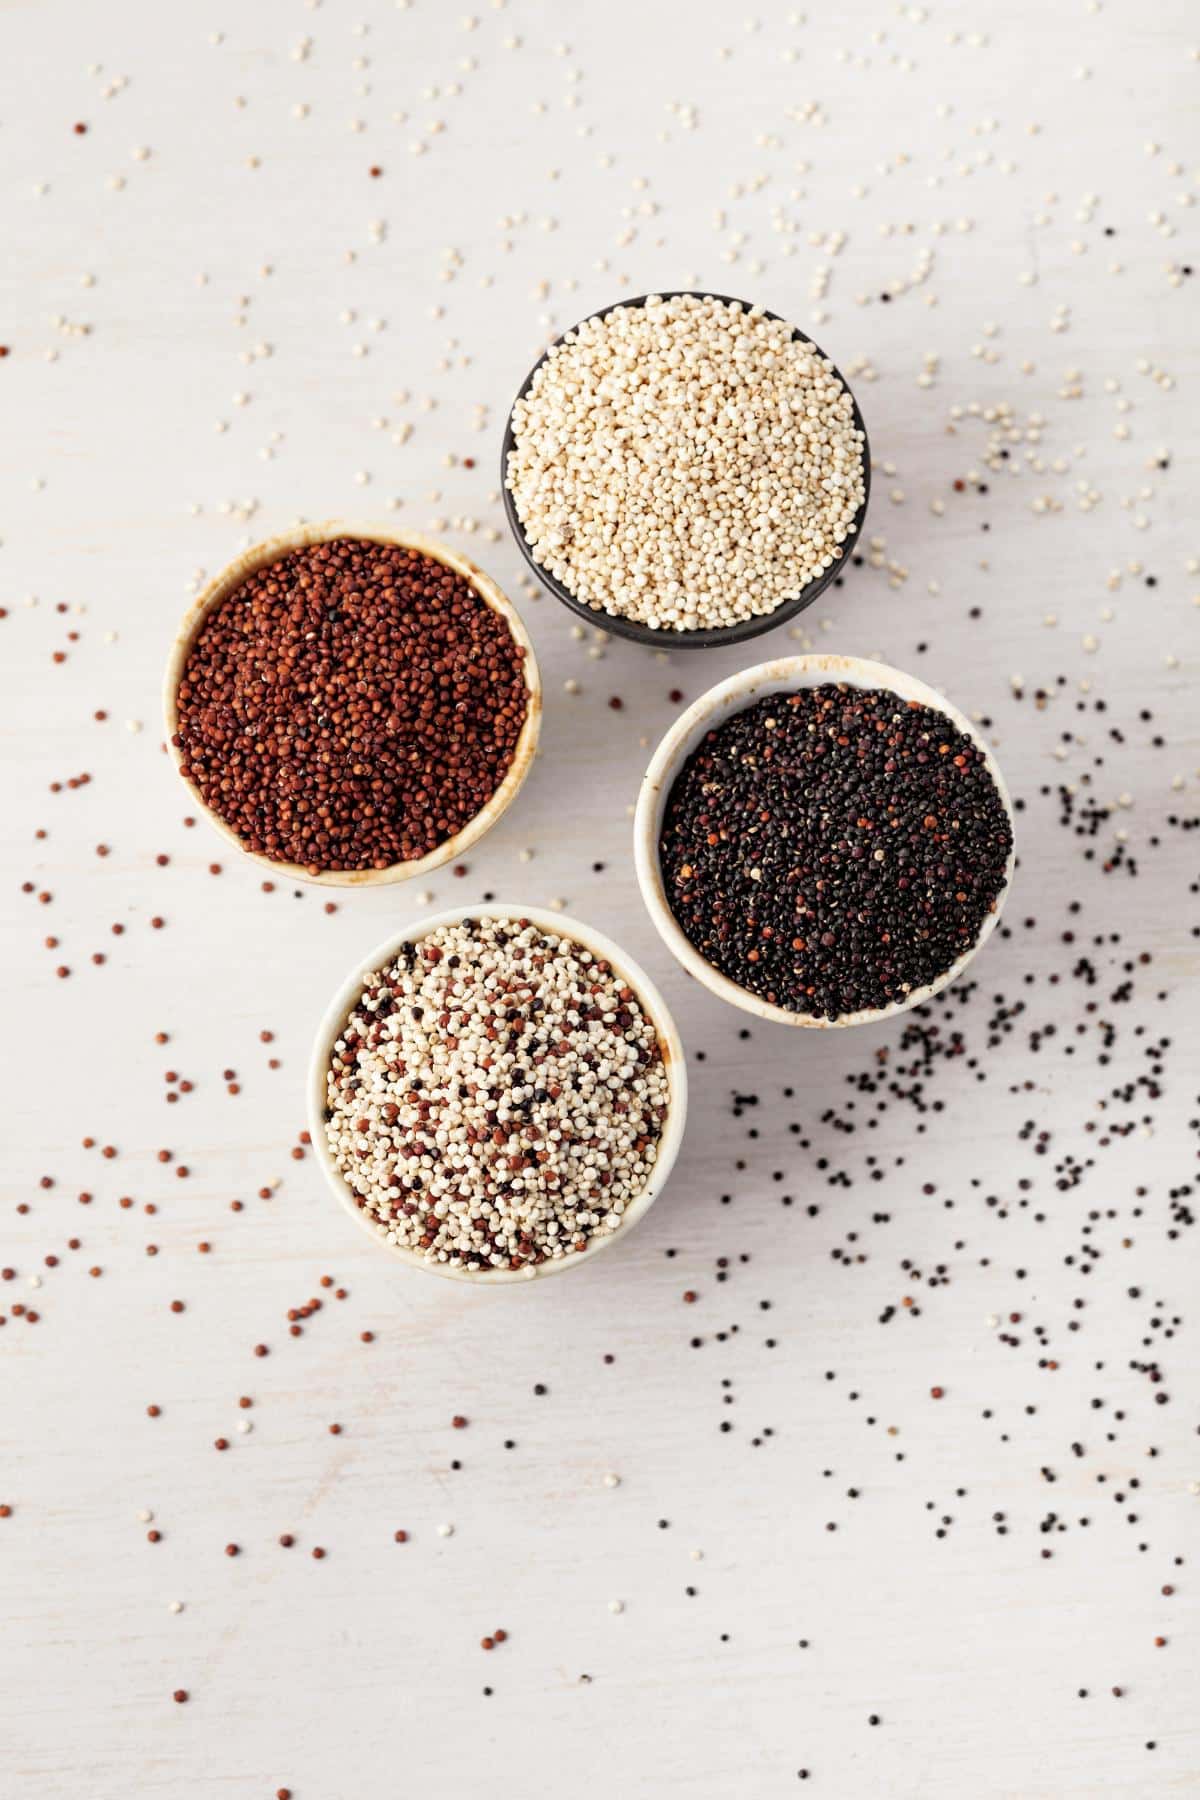 Small bowls of white, red, black and mixed quinoa on a table. 